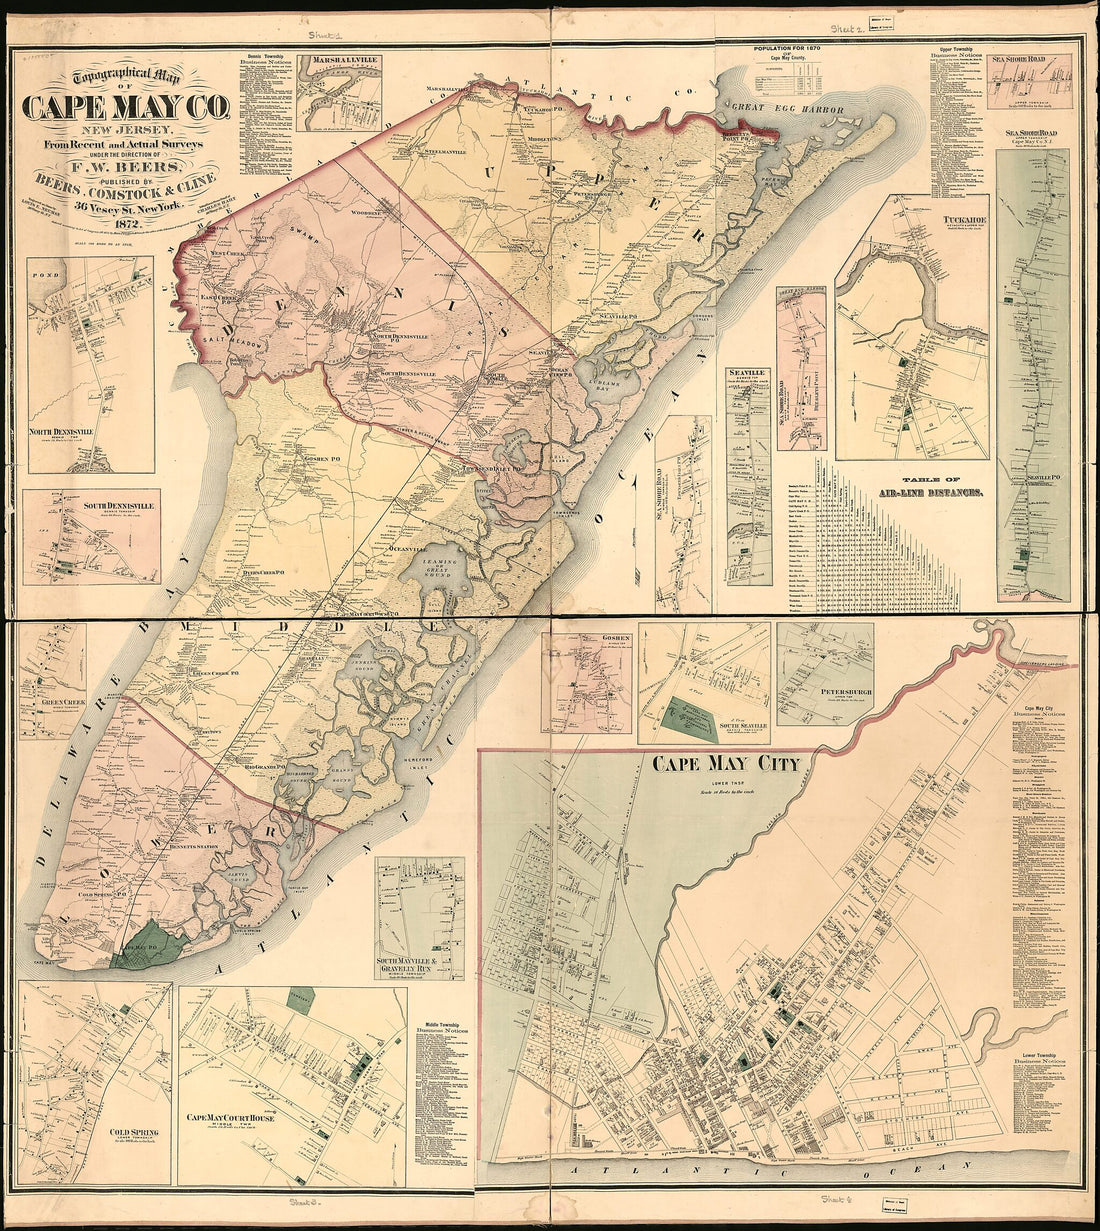 This old map of Topographical Map of Cape May County, New Jersey : from Recent and Actual Surveys from 1872 was created by Comstock &amp; Cline Beers, F. W. (Frederick W.) Beers, Chas. (Charles) Hart, Louis E. Neumann in 1872